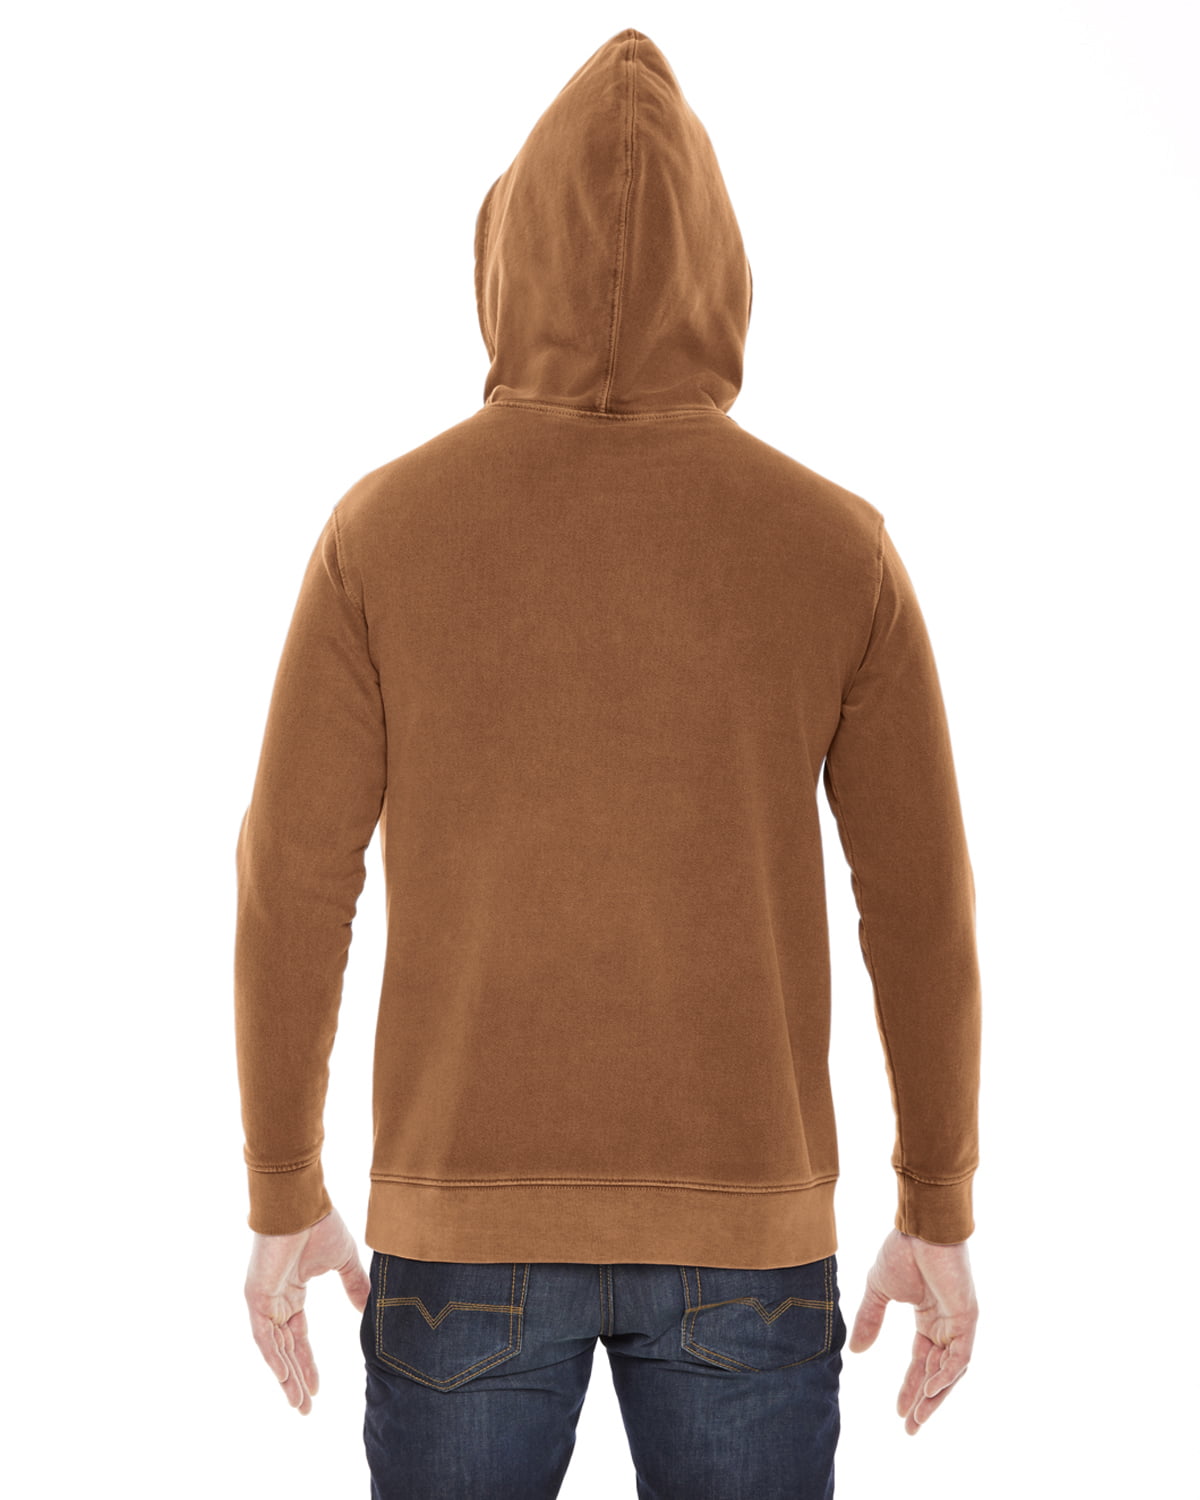 Authentic Pigment French Terry Hoodie AP207